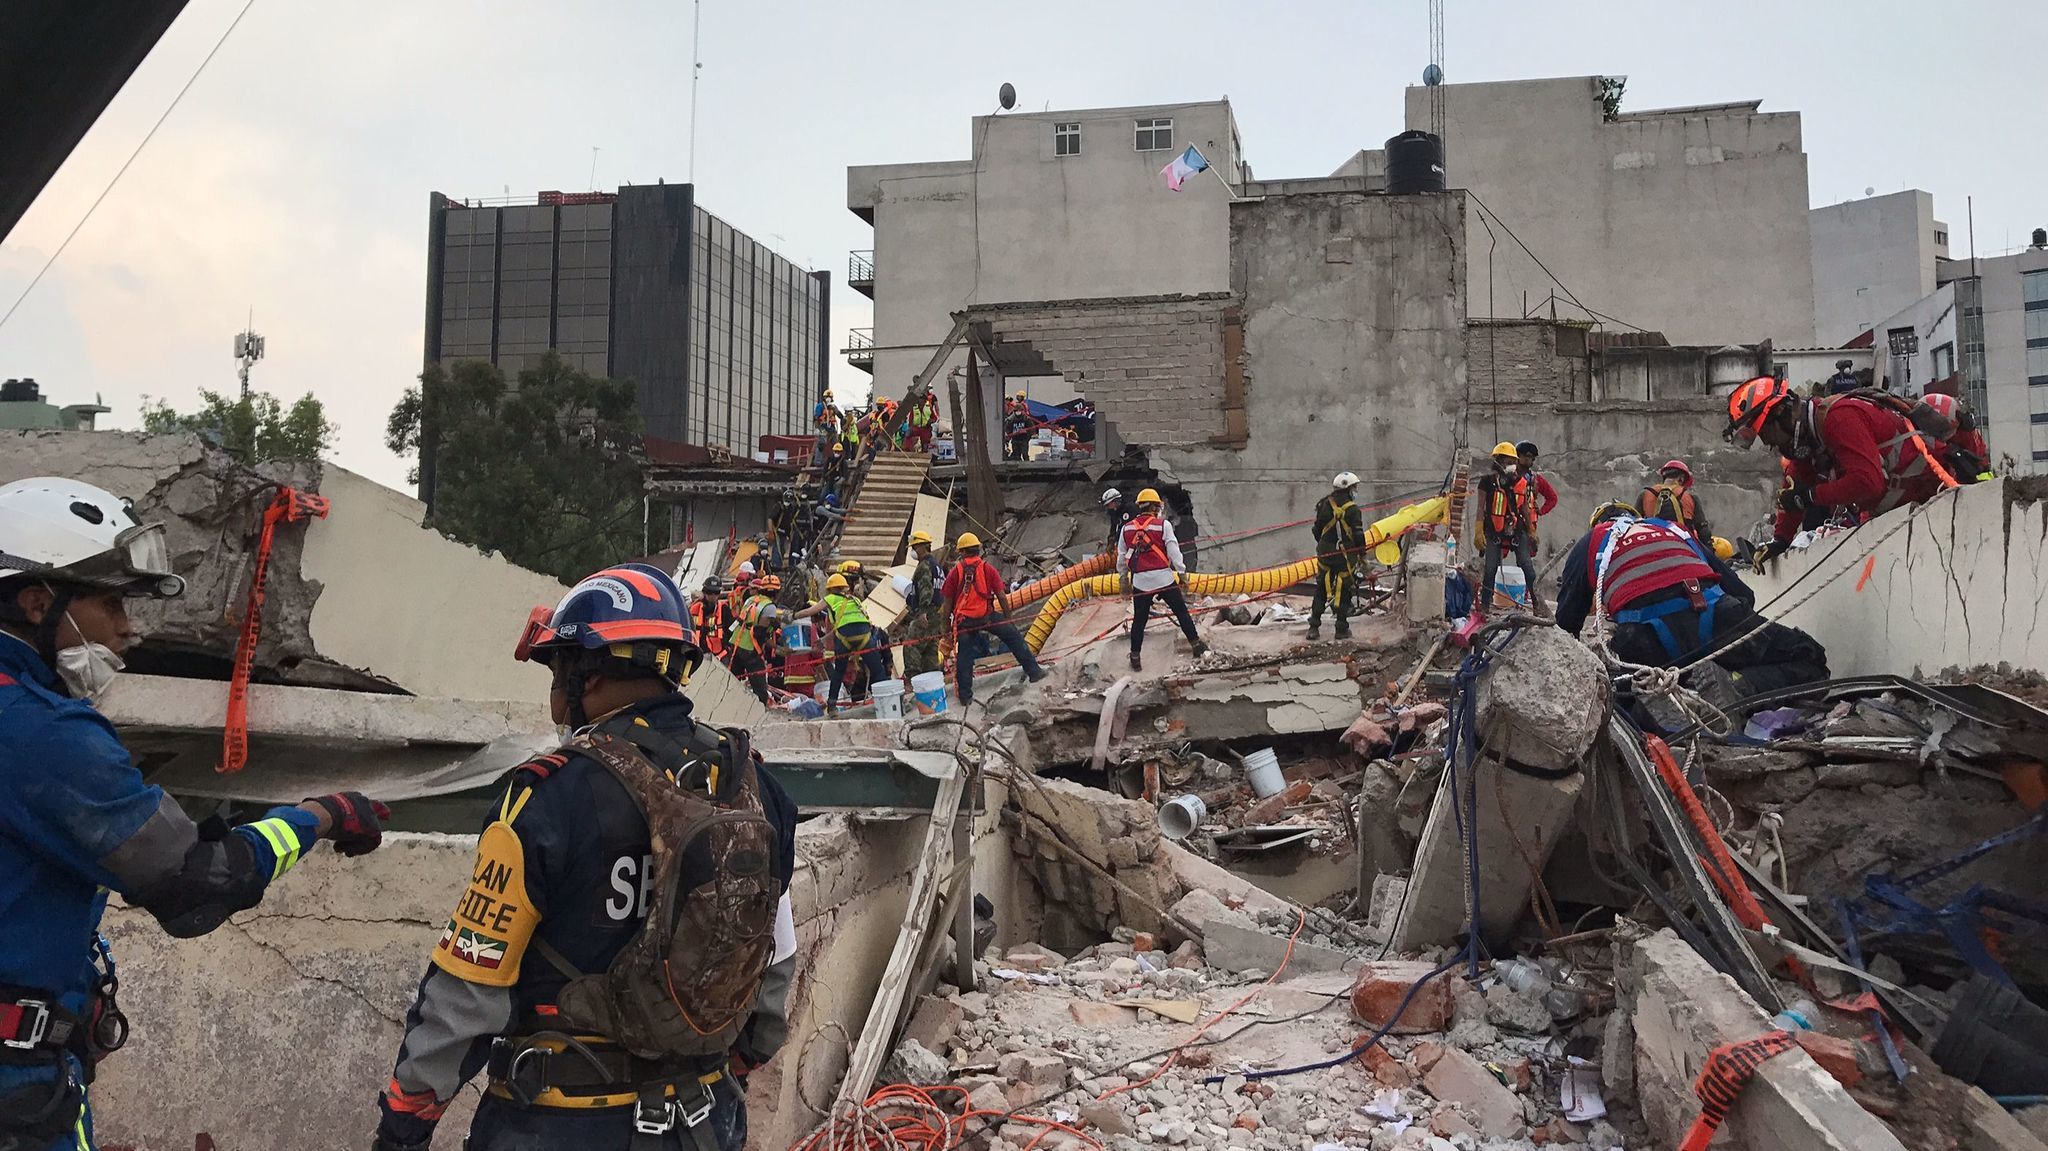 Emergency workers continue the recovery effort from the roof of the office building at Avenida Alvaro Obregon 286.